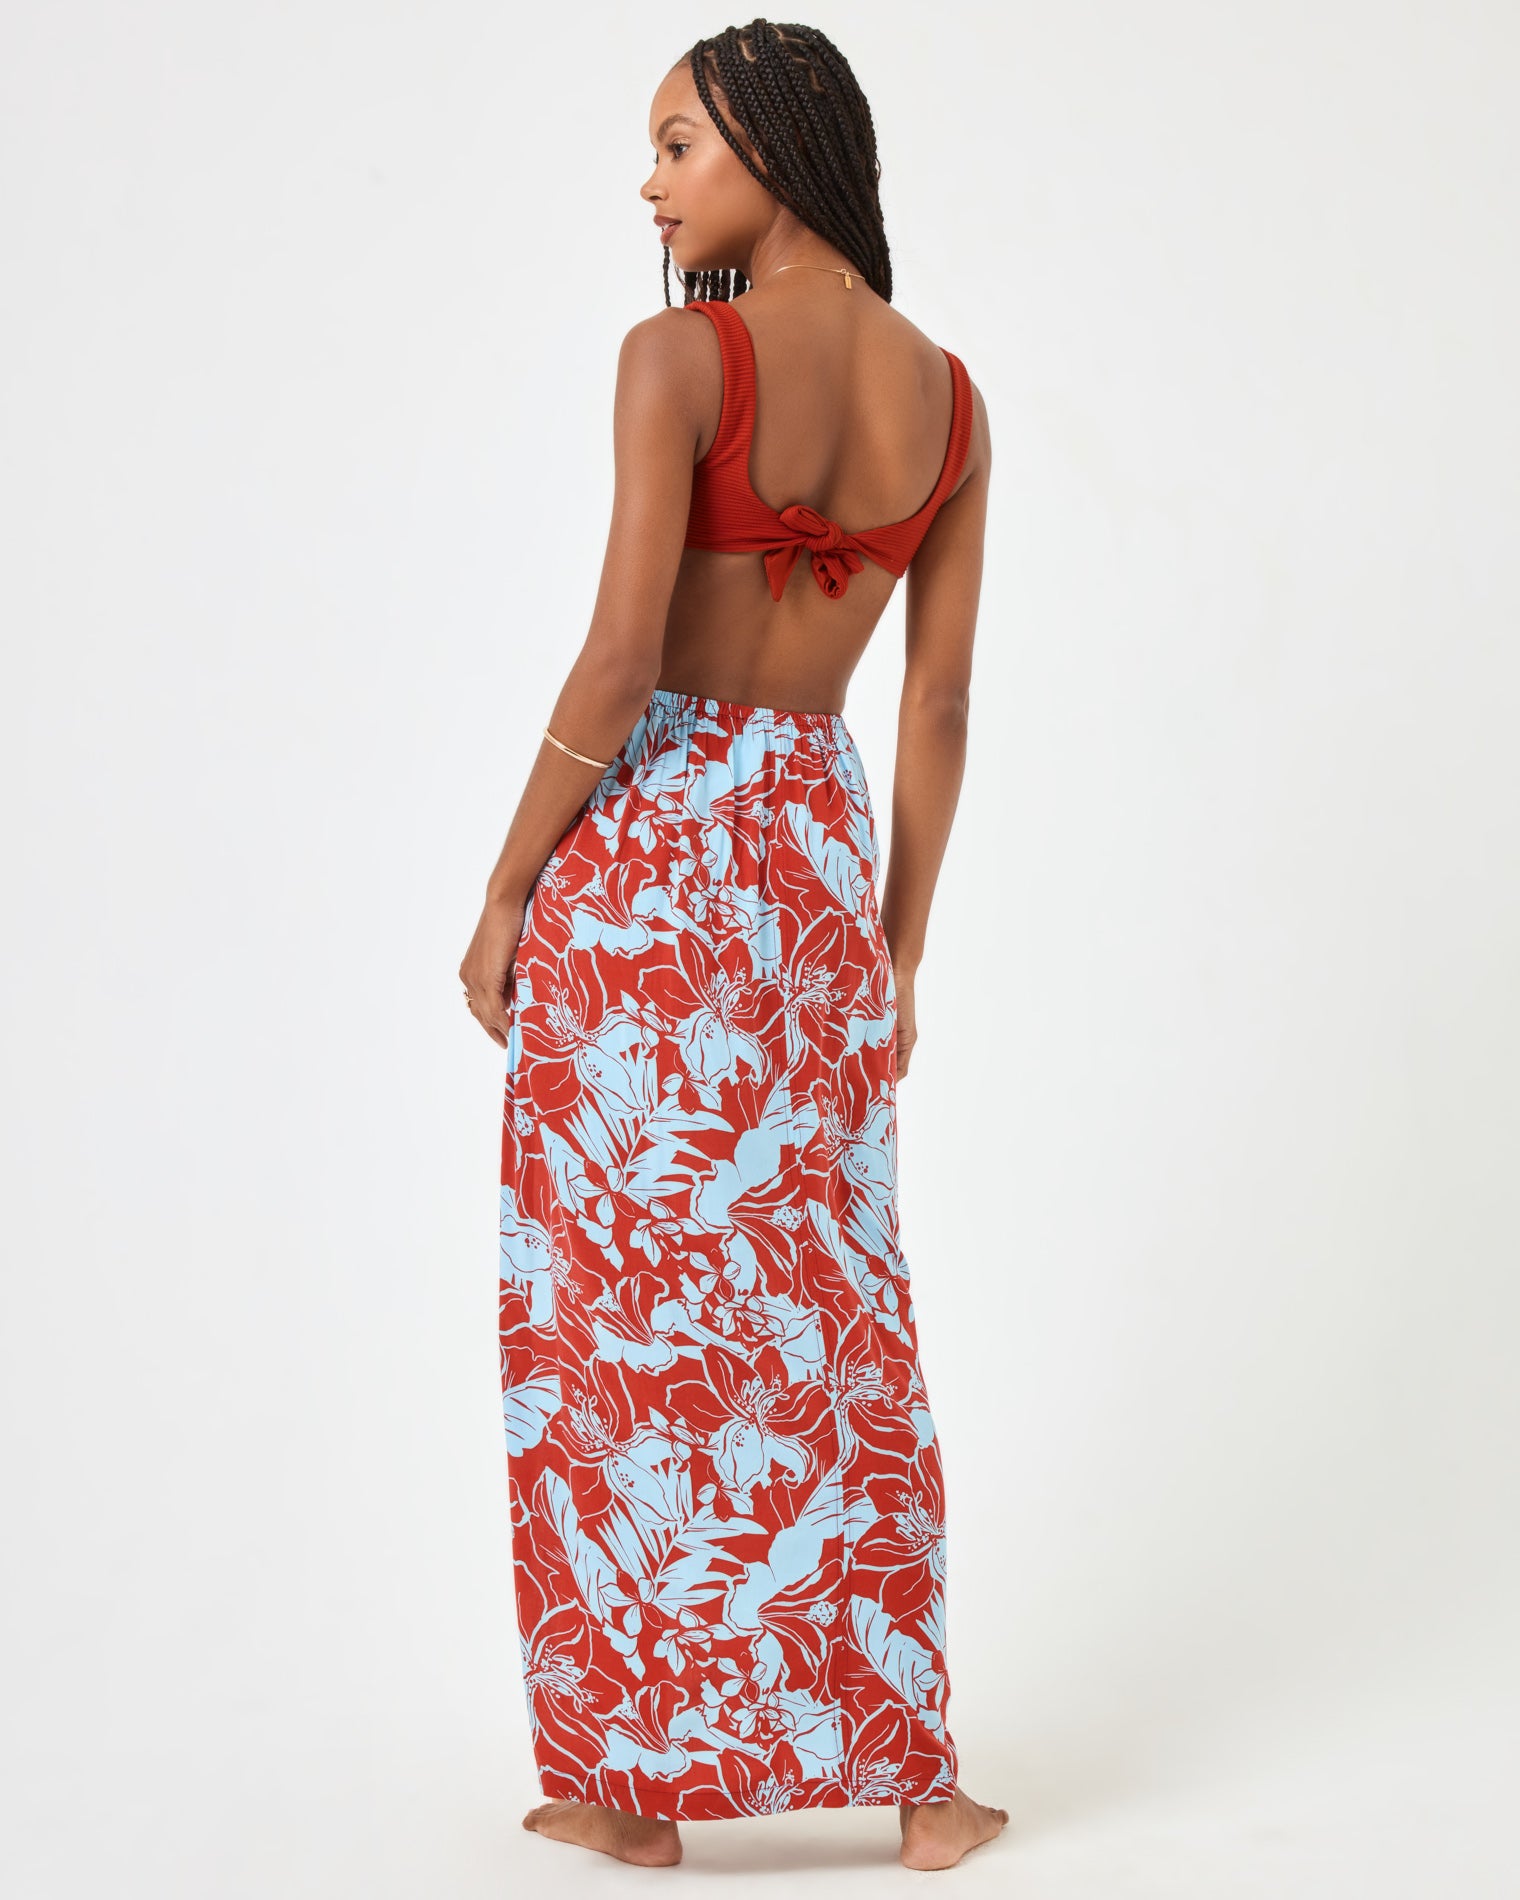 Printed Mia Cover-Up - Going Tropical